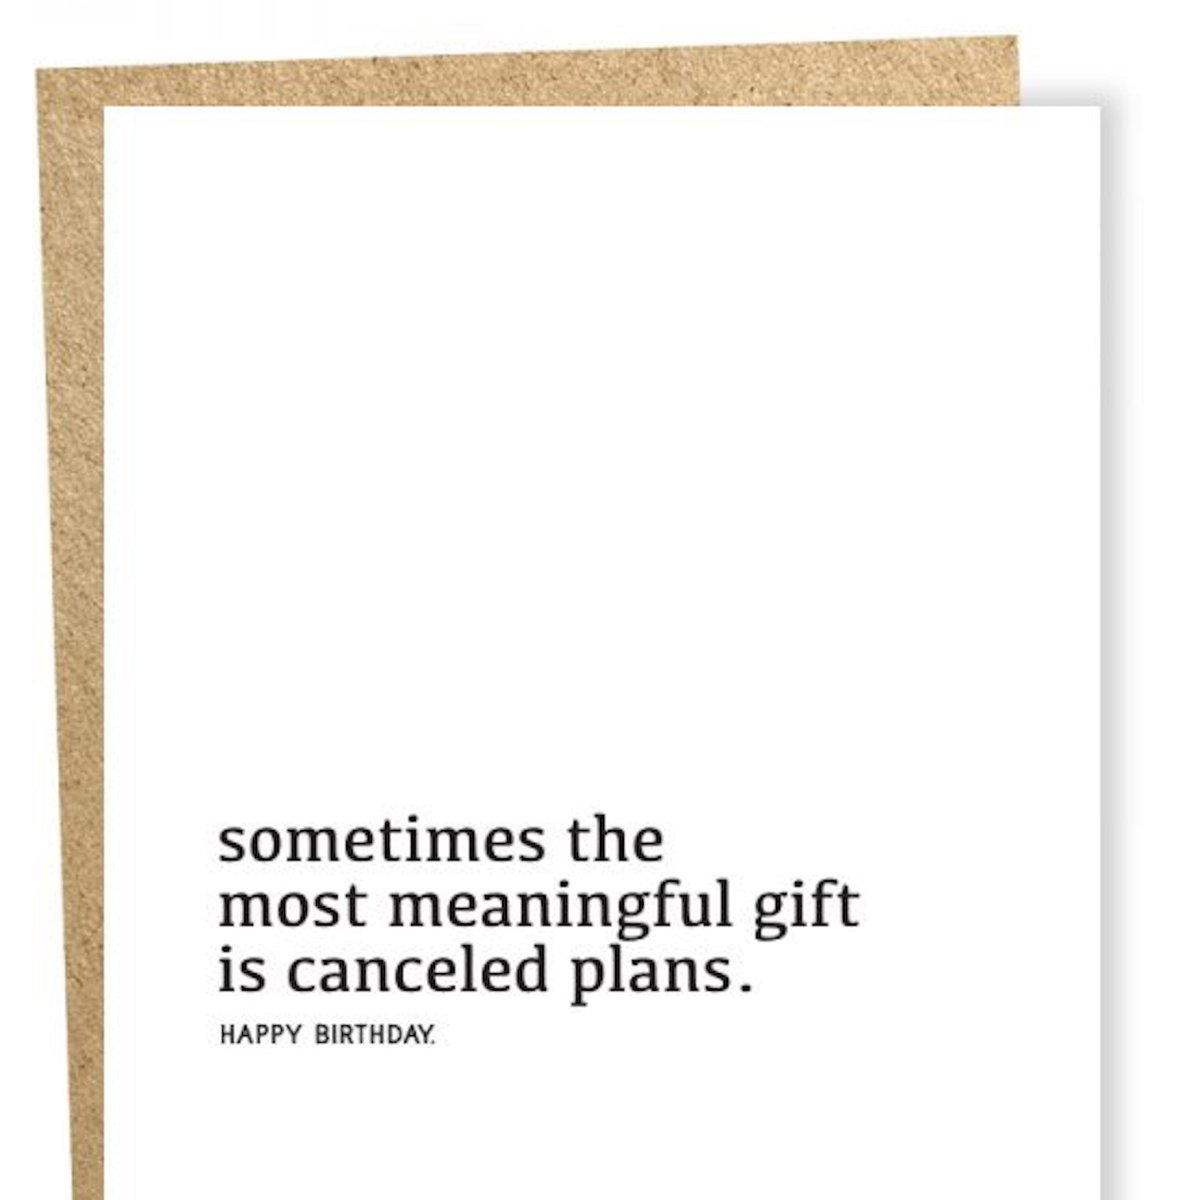 Kraft card with black text that reads: "SOMETIMES THE MOST MEANINGFUL GIFT IS CANCELED PLANS. HAPPY BIRTHDAY." Comes with a brown Kraft envelope. Designed by Sapling Press and printed in Pittsburgh, PA.